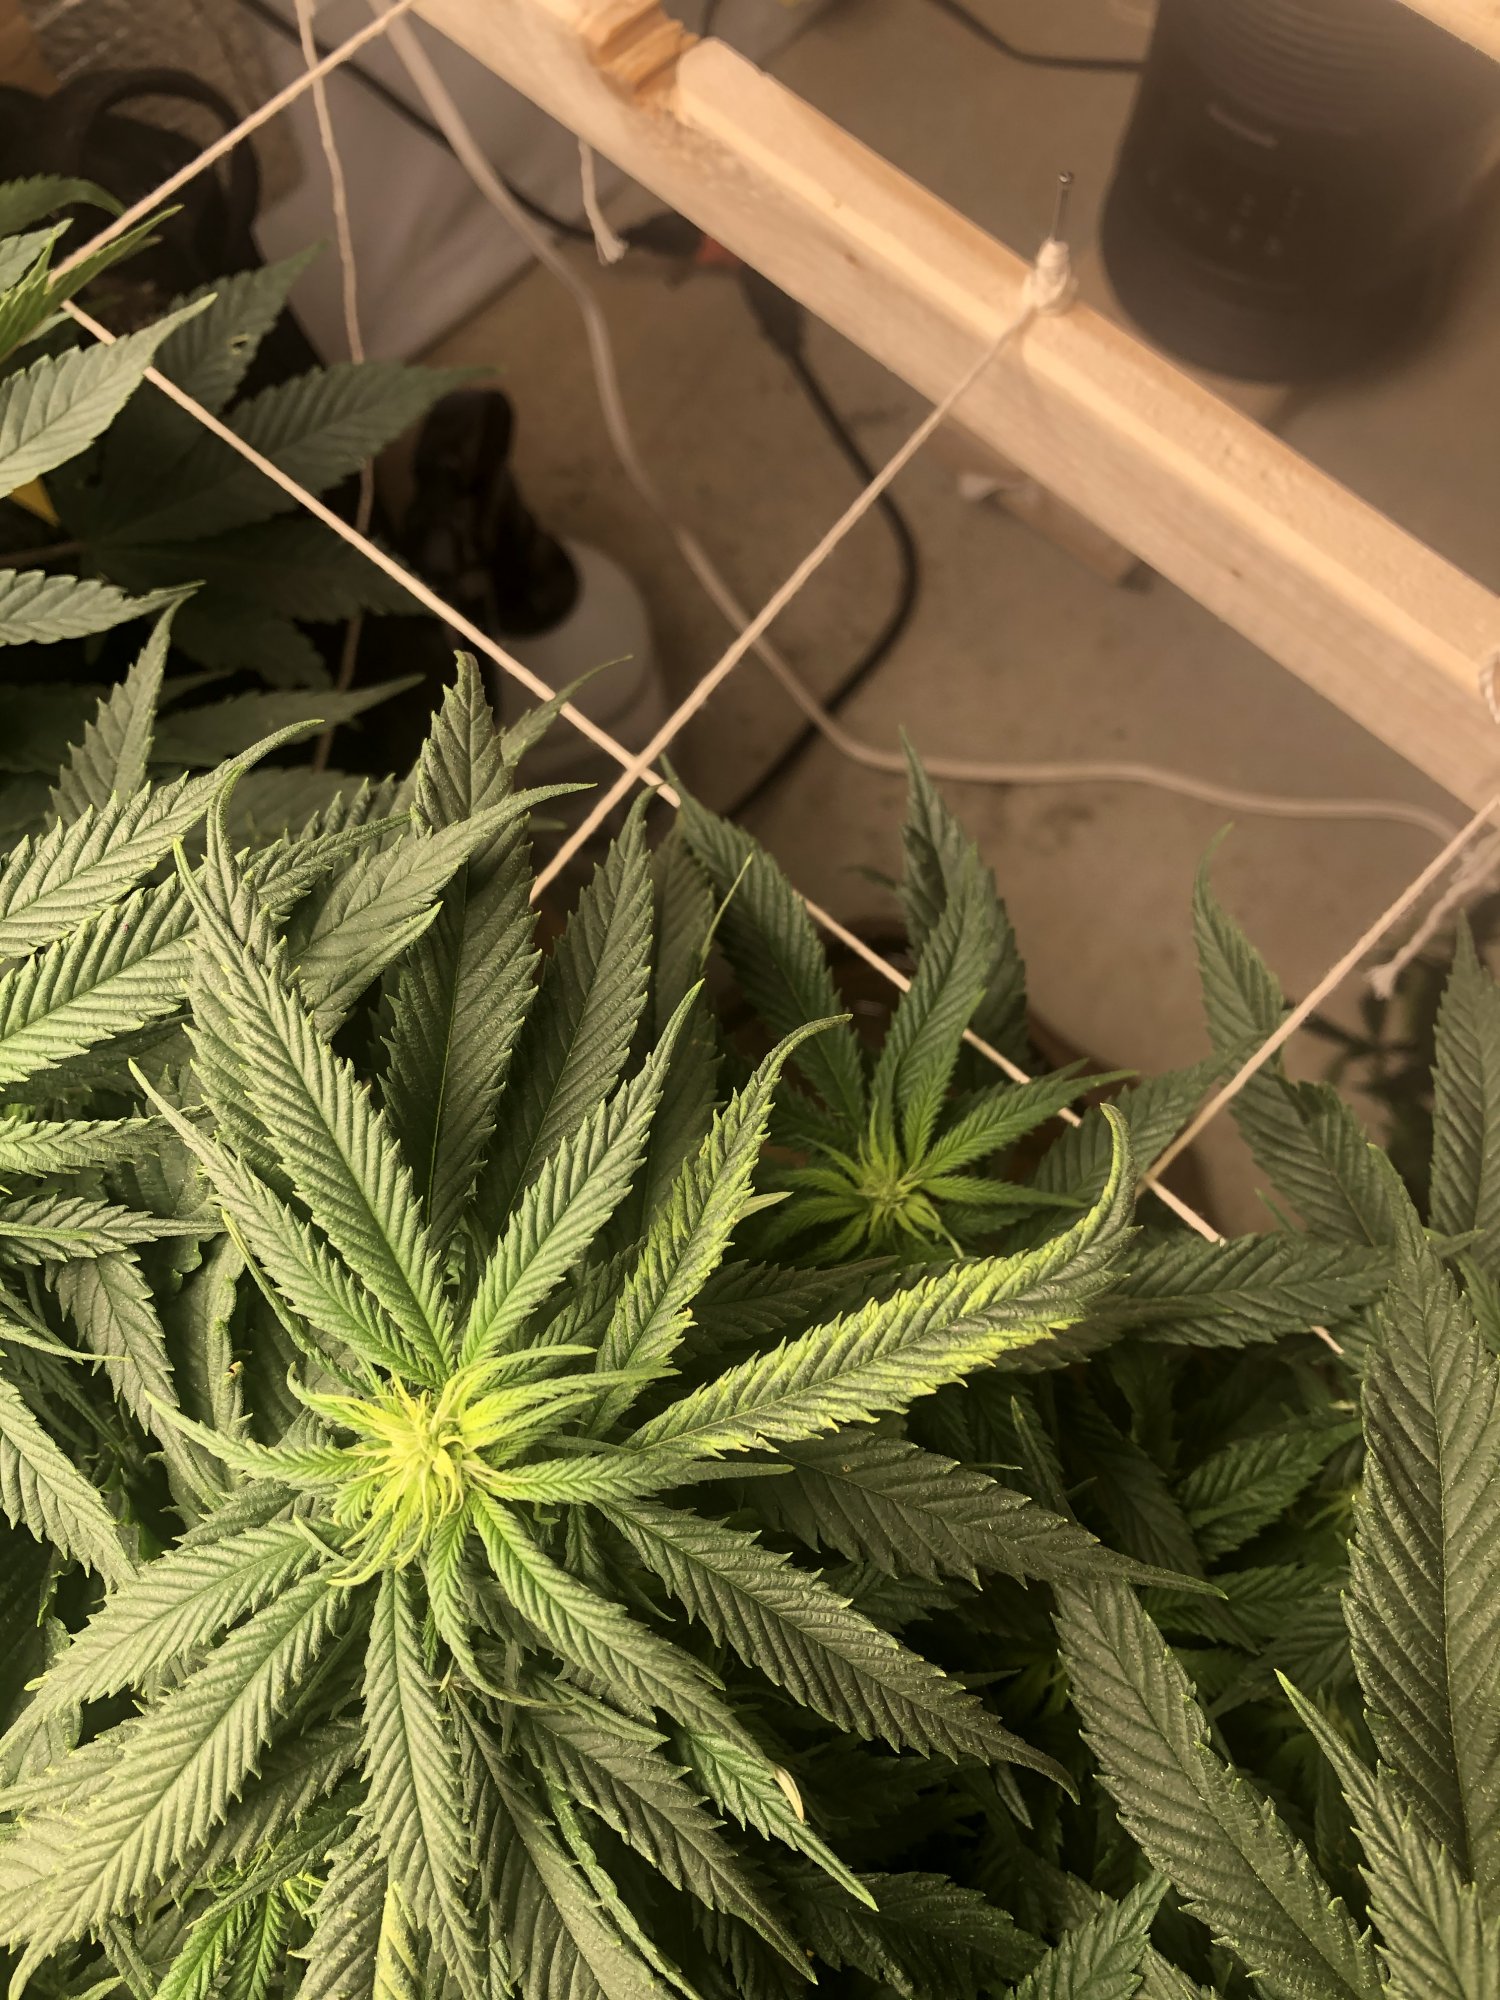 Is this a possible potassium deficiency or light  issue 2